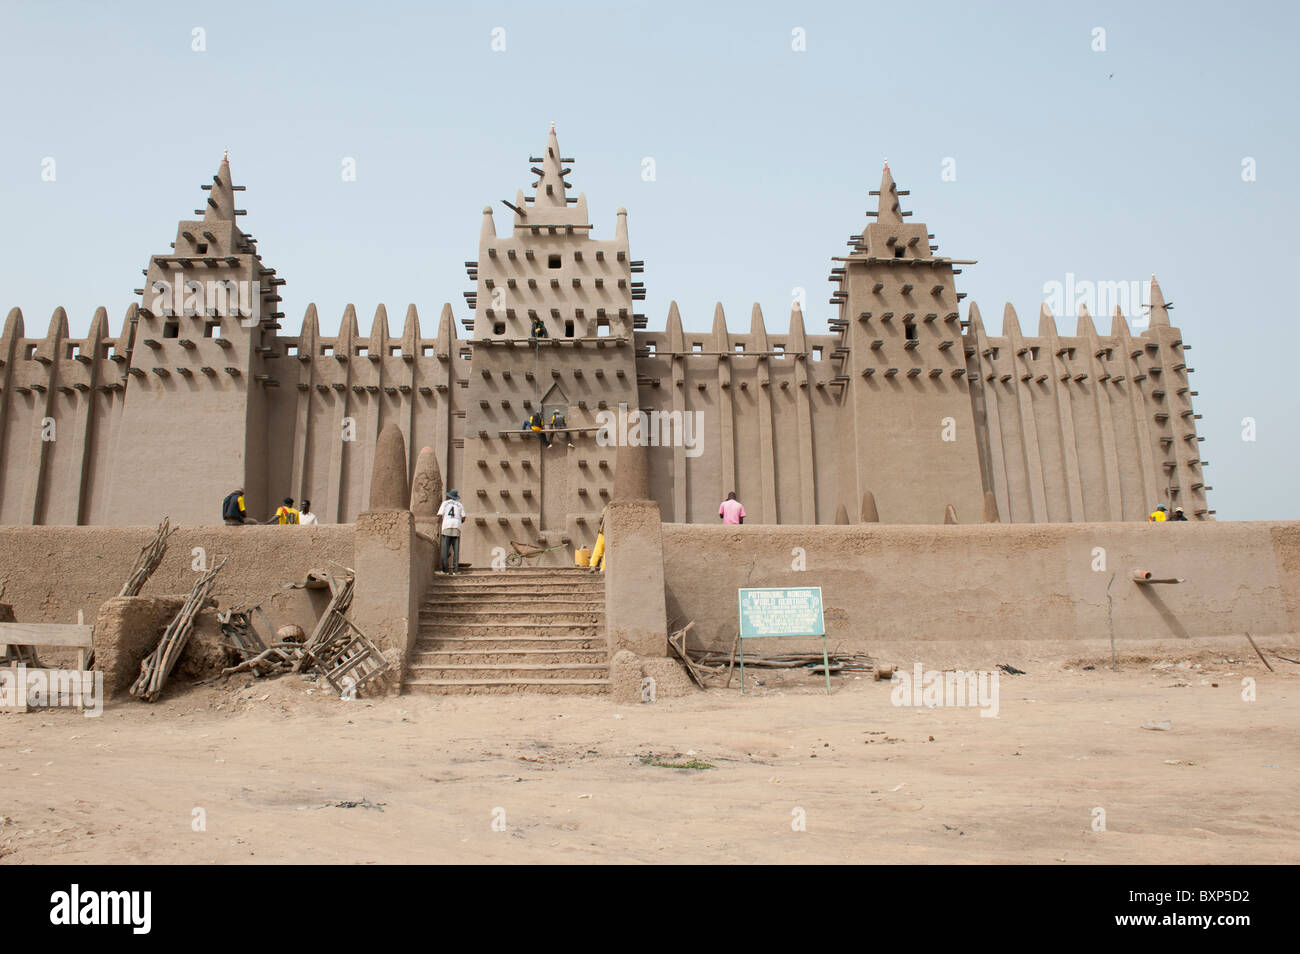 Workers of the "Aga Khan Trust for Culture" repairing the plasterwork of the Great  Mosque of Djenné, Mali Stock Photo